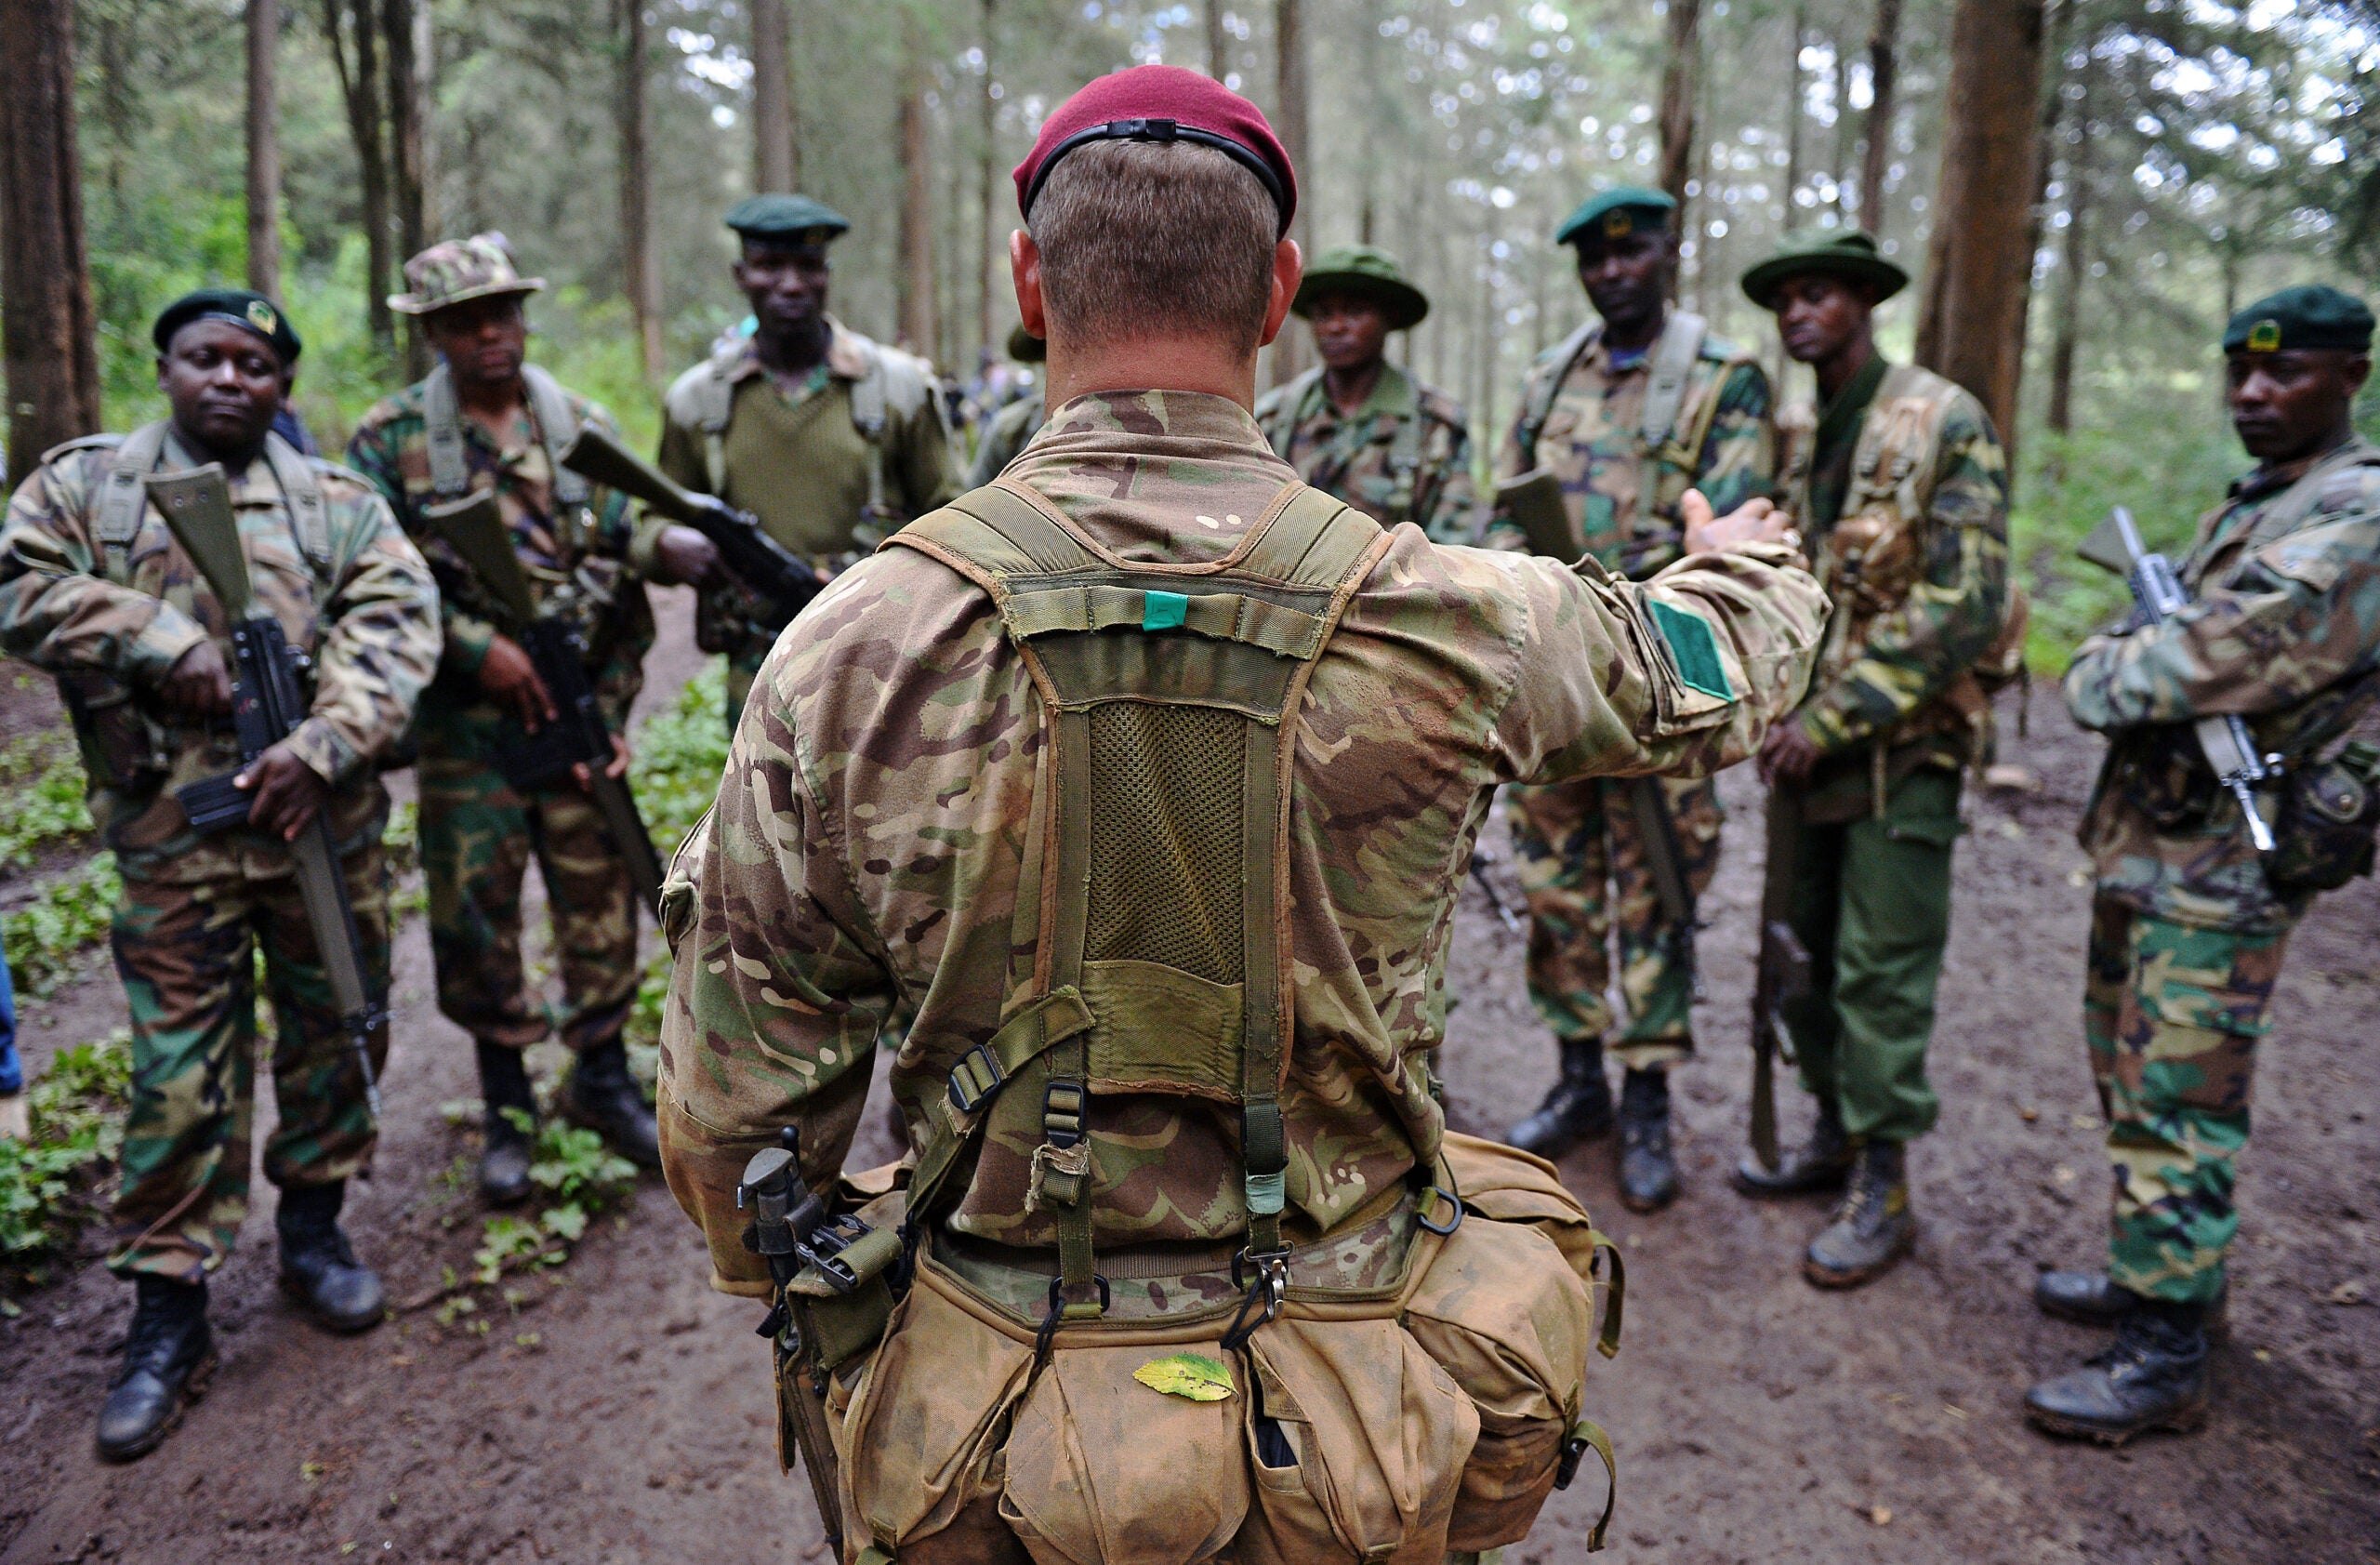 British Elite Paratrooper, 3rd battalion Parachute regiment (3rd Para), Corporal Andy Smith (C) instructs Kenya Wildlife and Forest Services rangers during an anti-poaching training exercise in Nanyuki on December 5, 2013. British paratroopers are helping to train Kenyan Wildlife and Forest service rangers in basic infantry skills near their base in Nanyuki.    AFP PHOTO / Carl de Souza        (Photo credit should read CARL DE SOUZA/AFP via Getty Images)